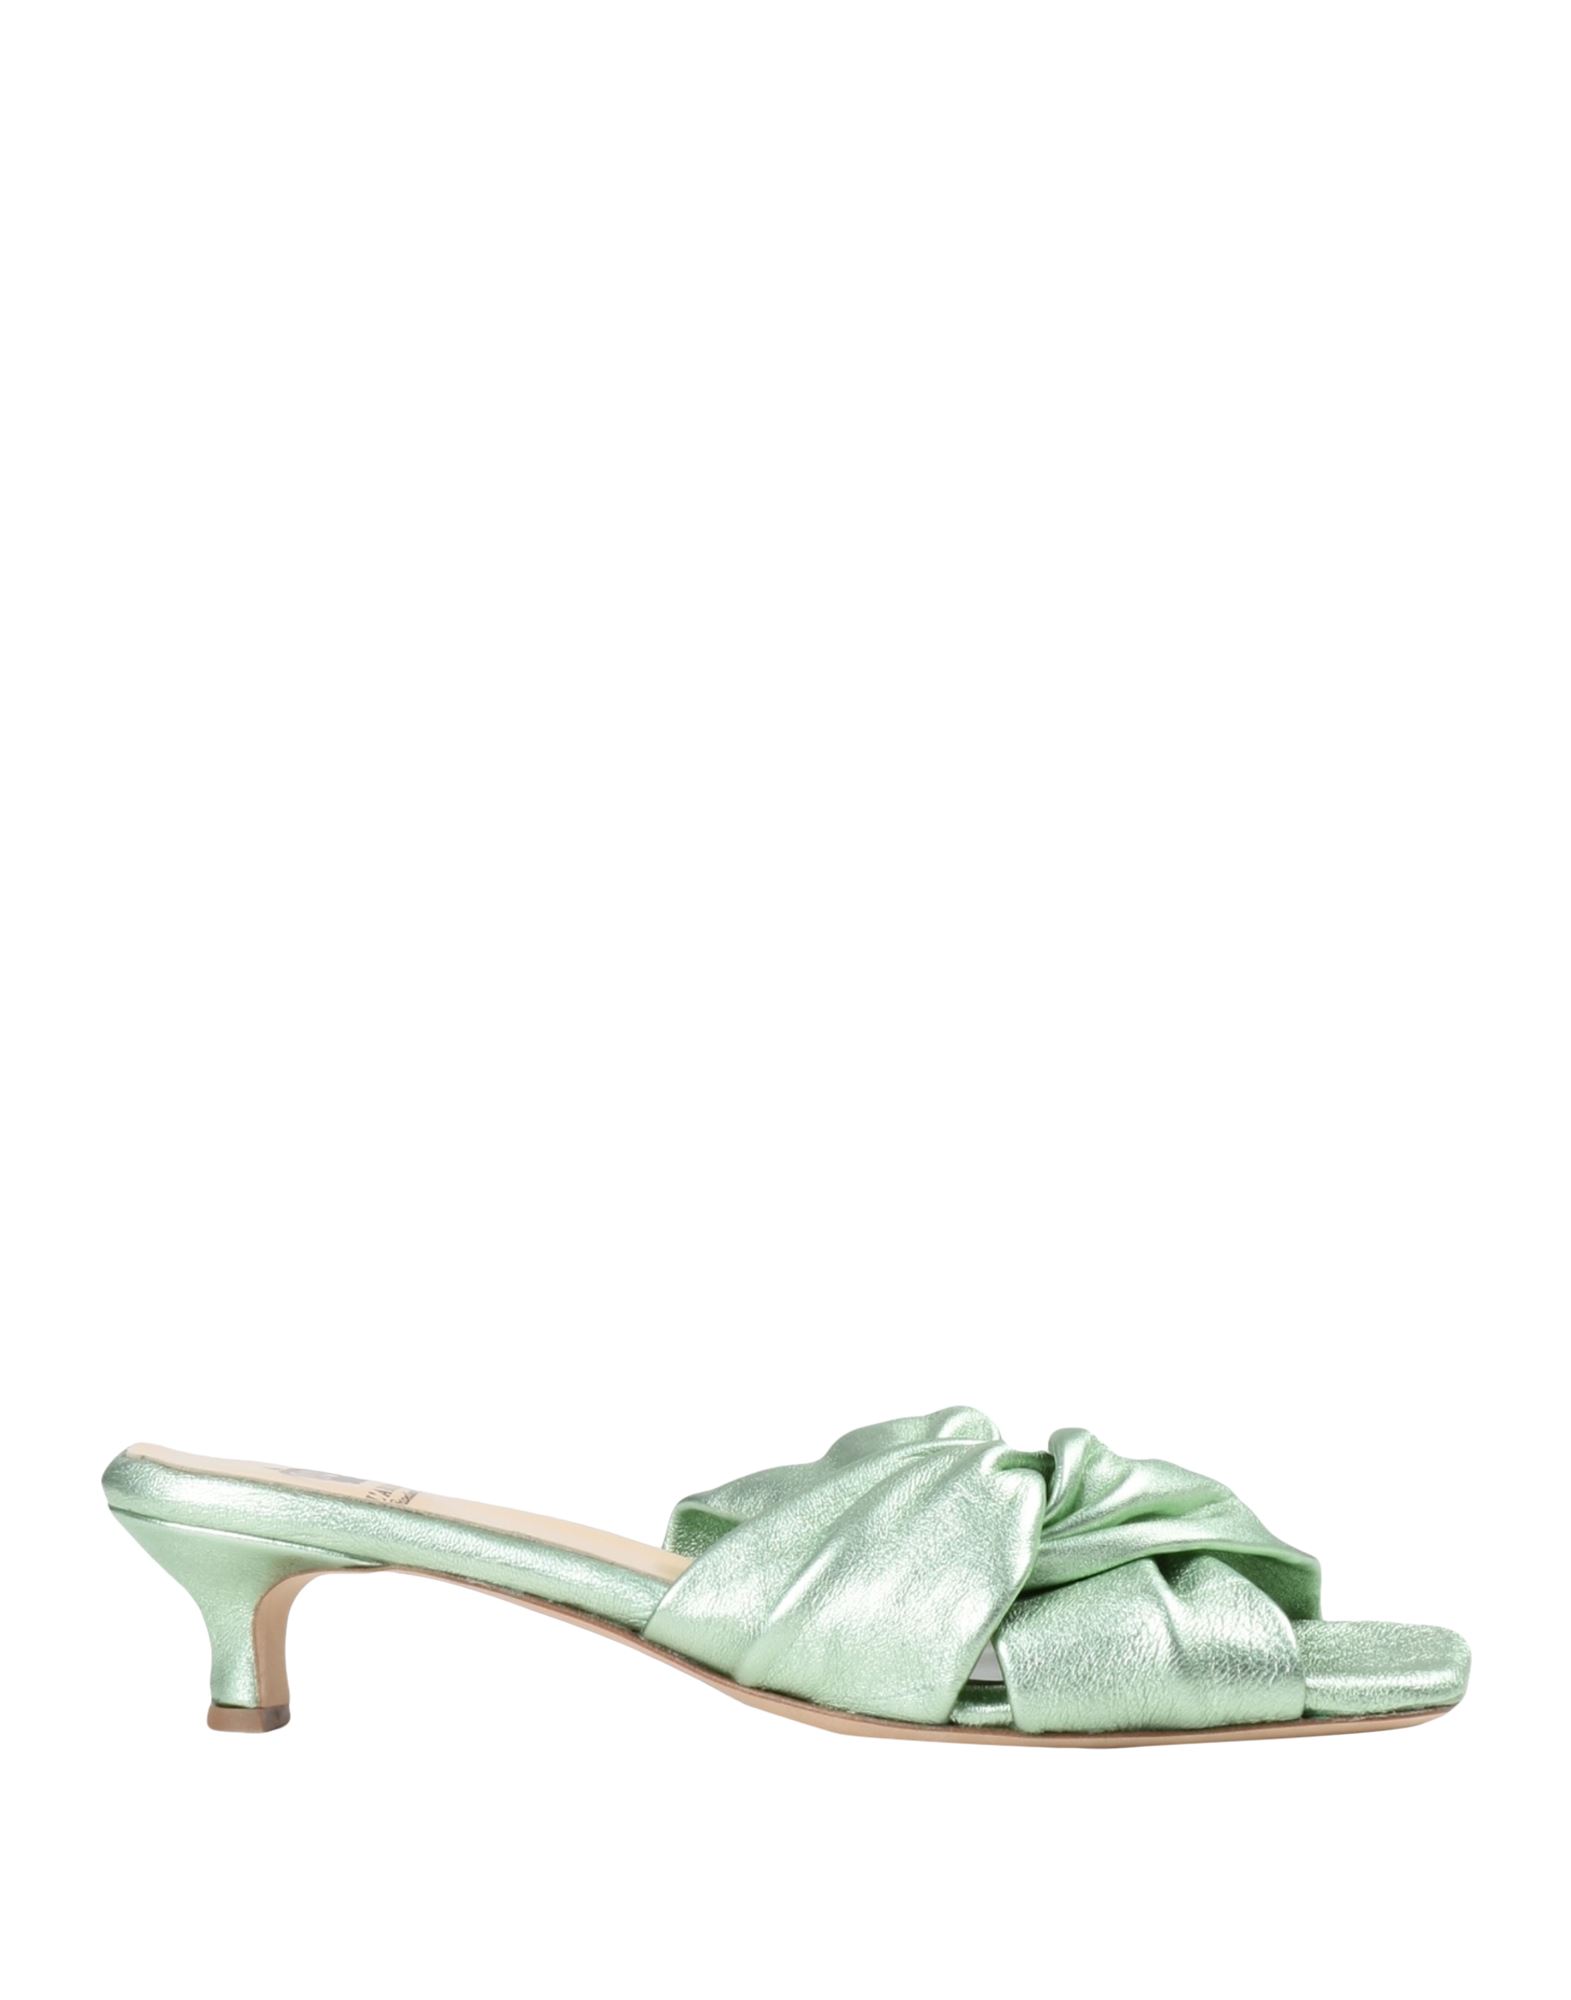 L'arianna Woman Sandals Light Green Size 8 Soft Leather